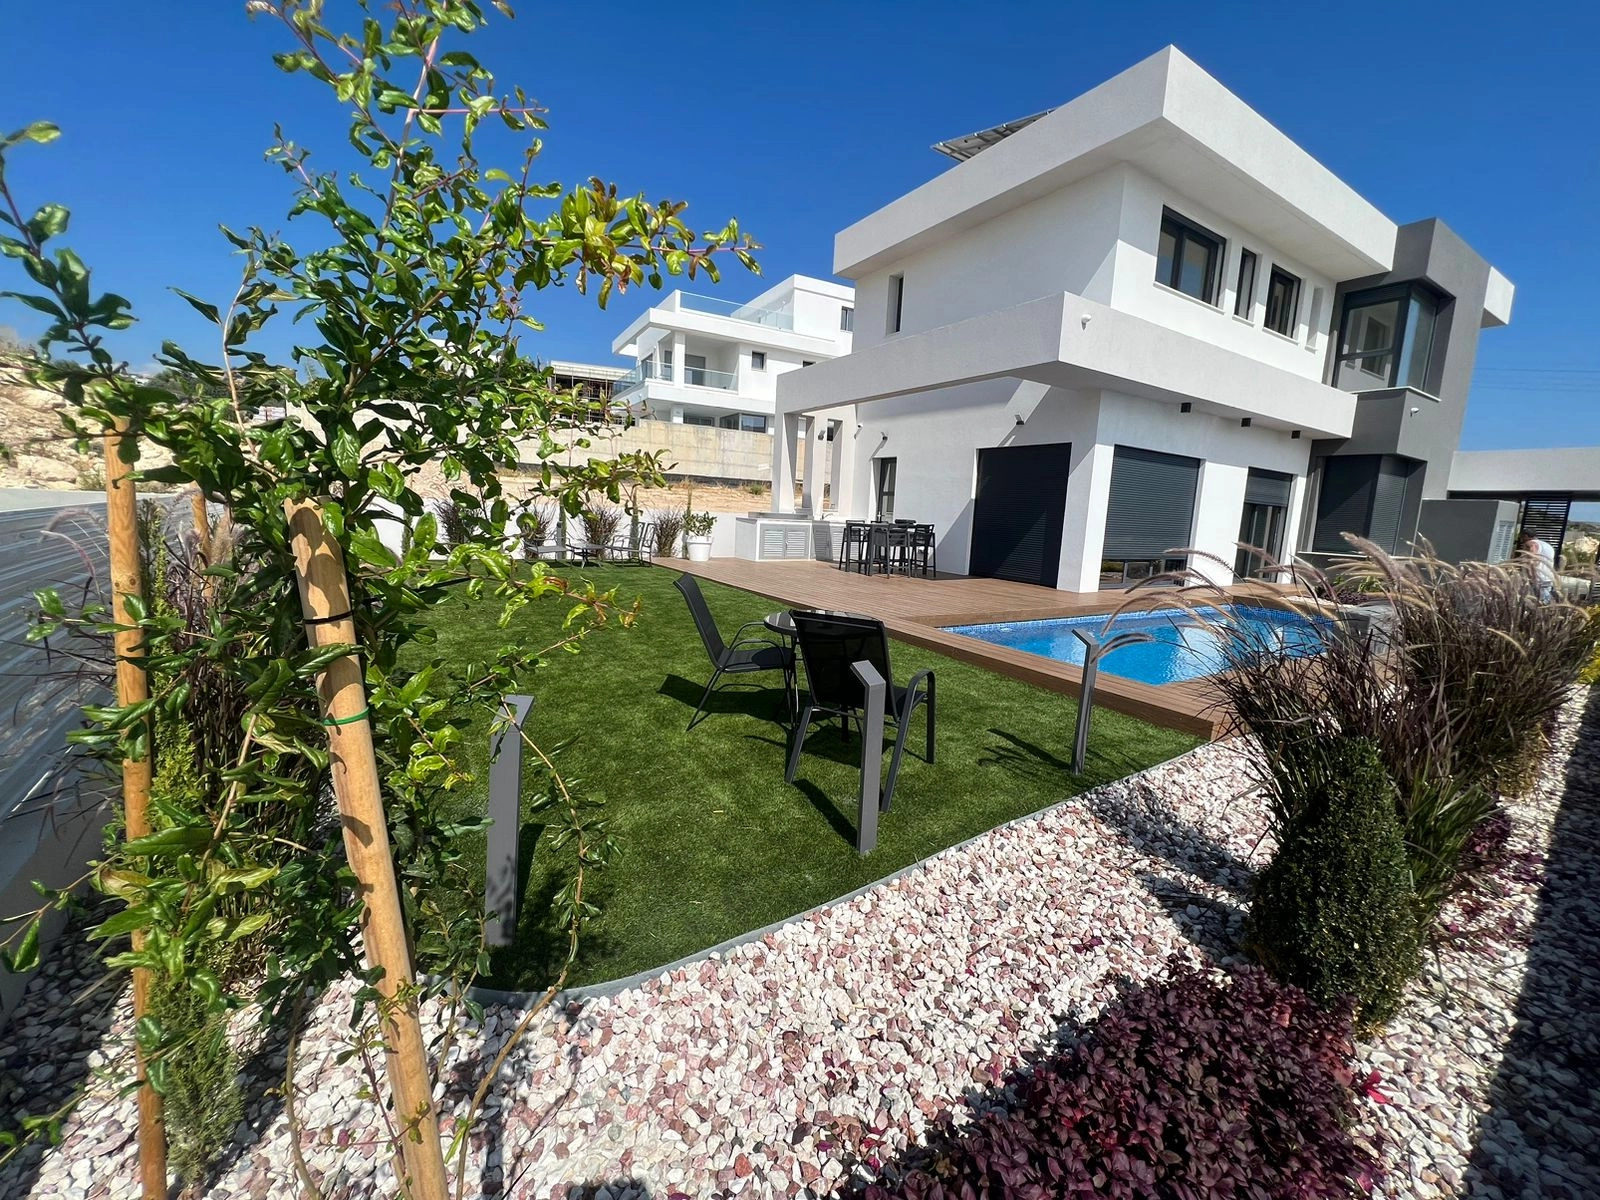 4 Bedroom House for Rent in Limassol District